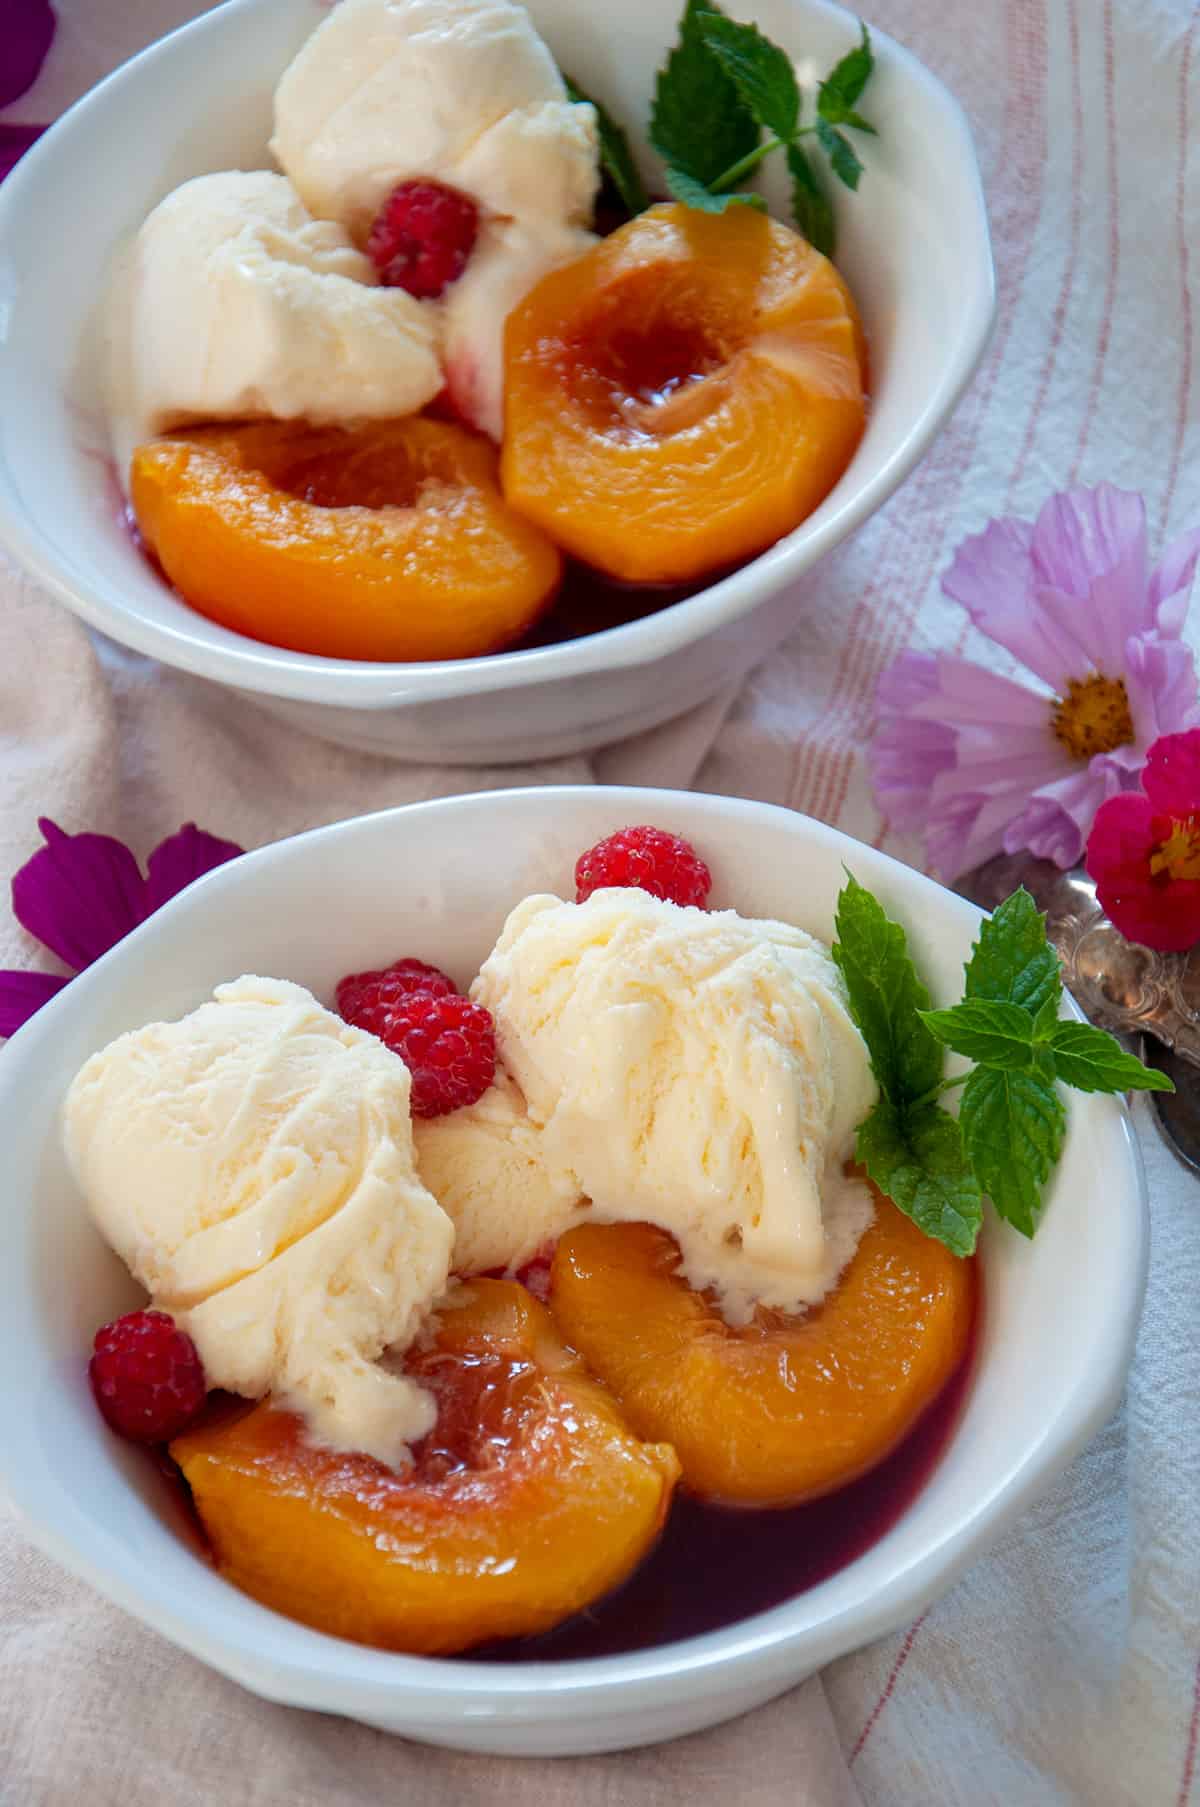 Two bowls of peach melba with some flowers in the background.